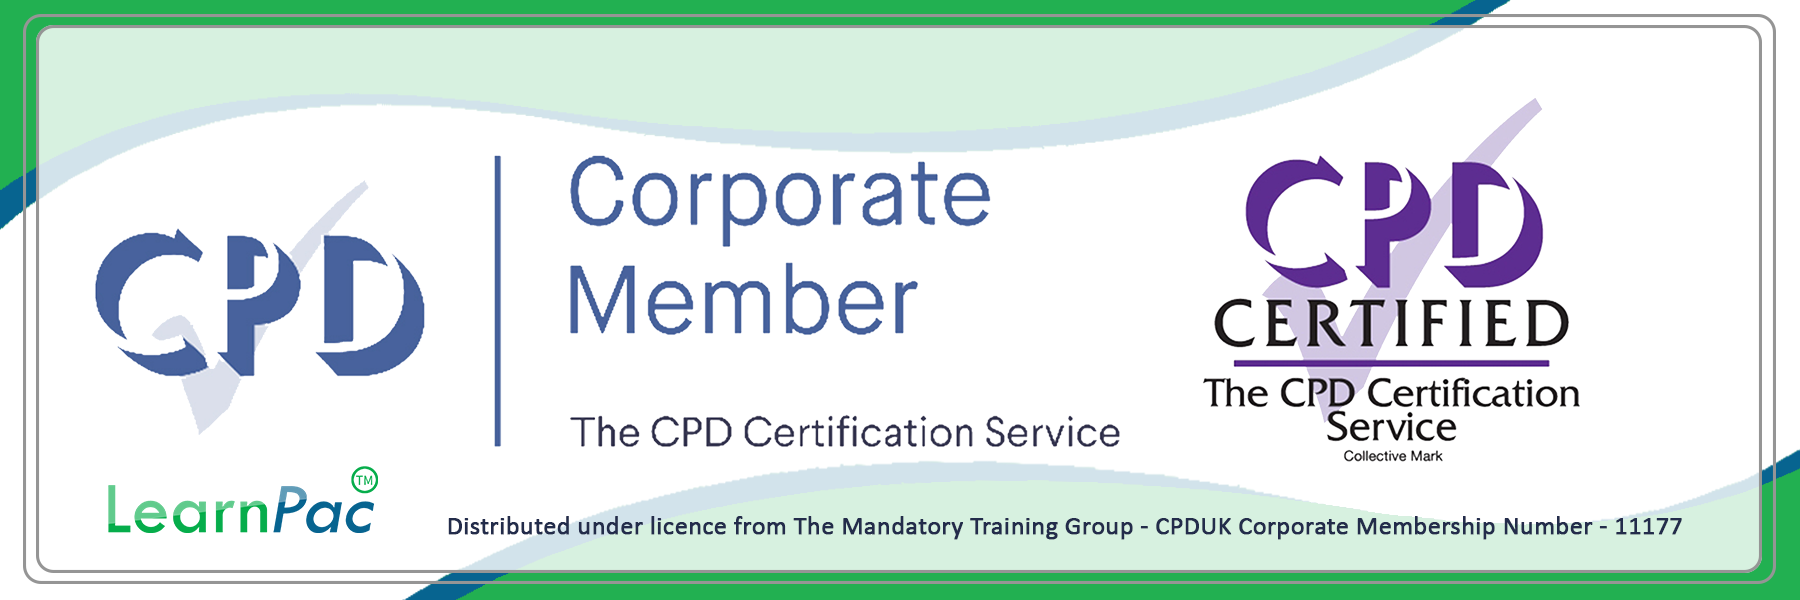 Immunisation and Vaccination Training - E-Learning Courses with Certificates - CPD Certified - LearnPac Systems UK -